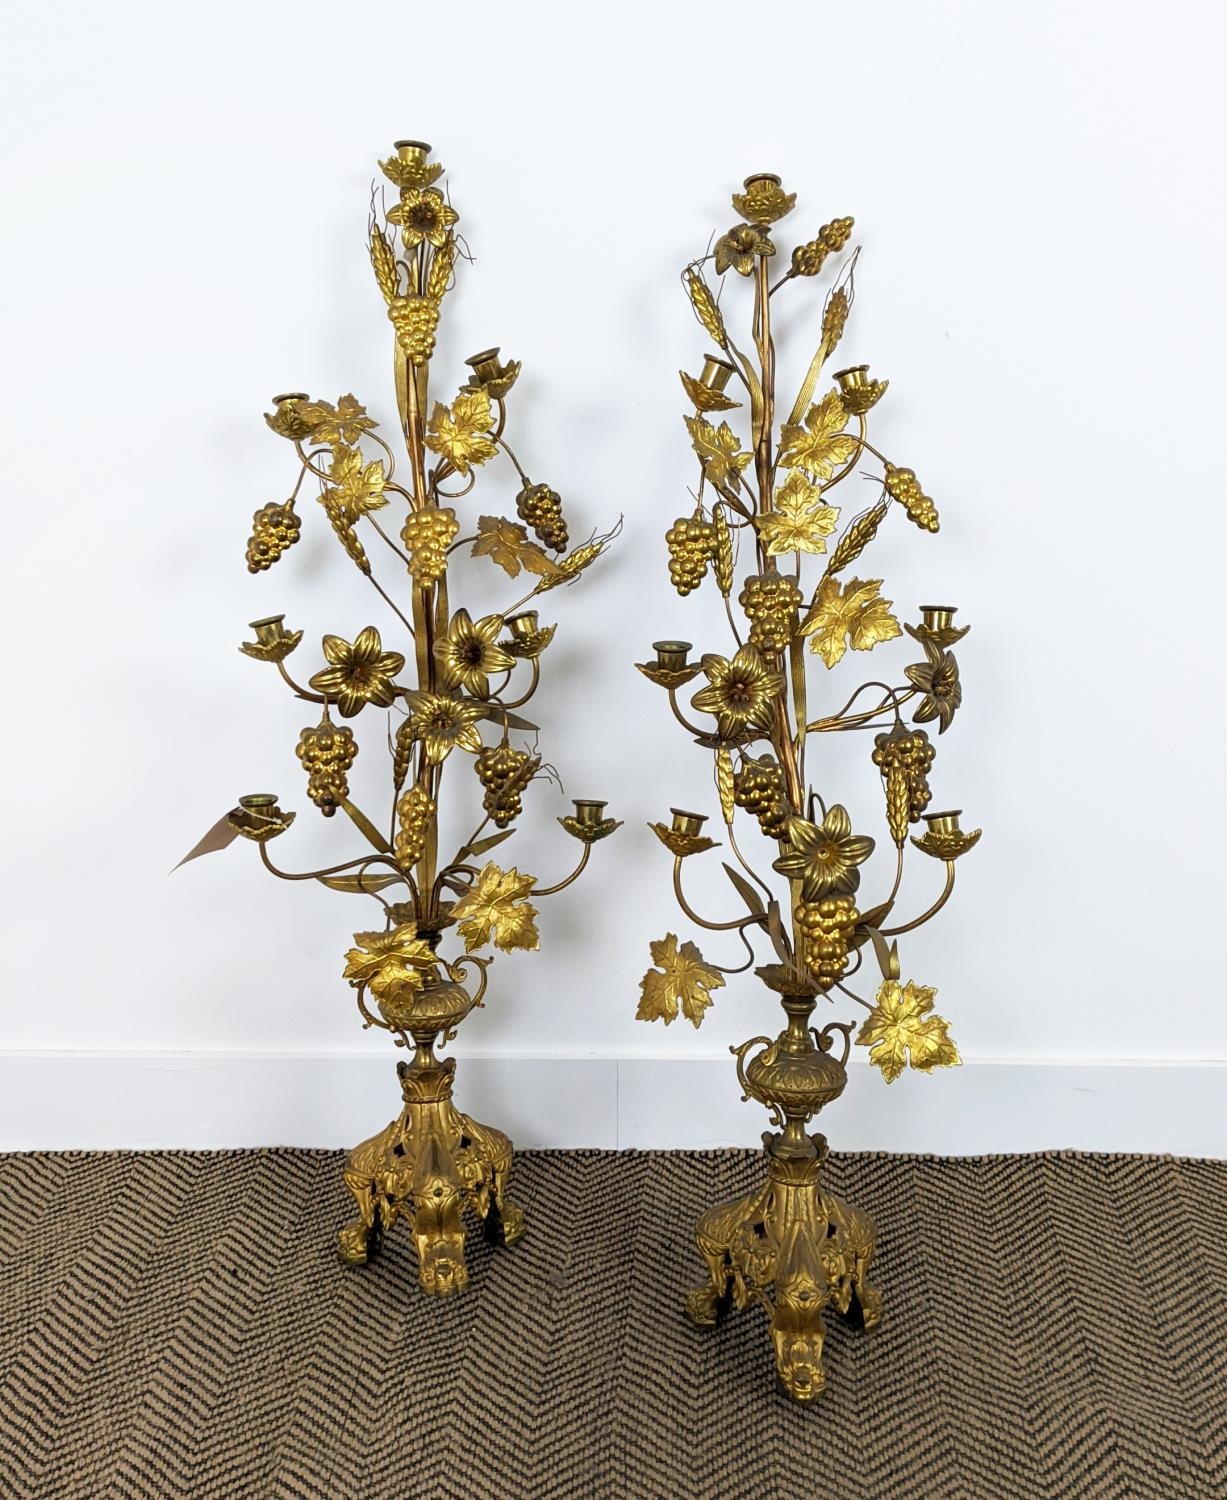 TABLE CANDLABRAS, a pair, each 107cm H x 33cm W, gilt metal with grain and grape detail, with candle